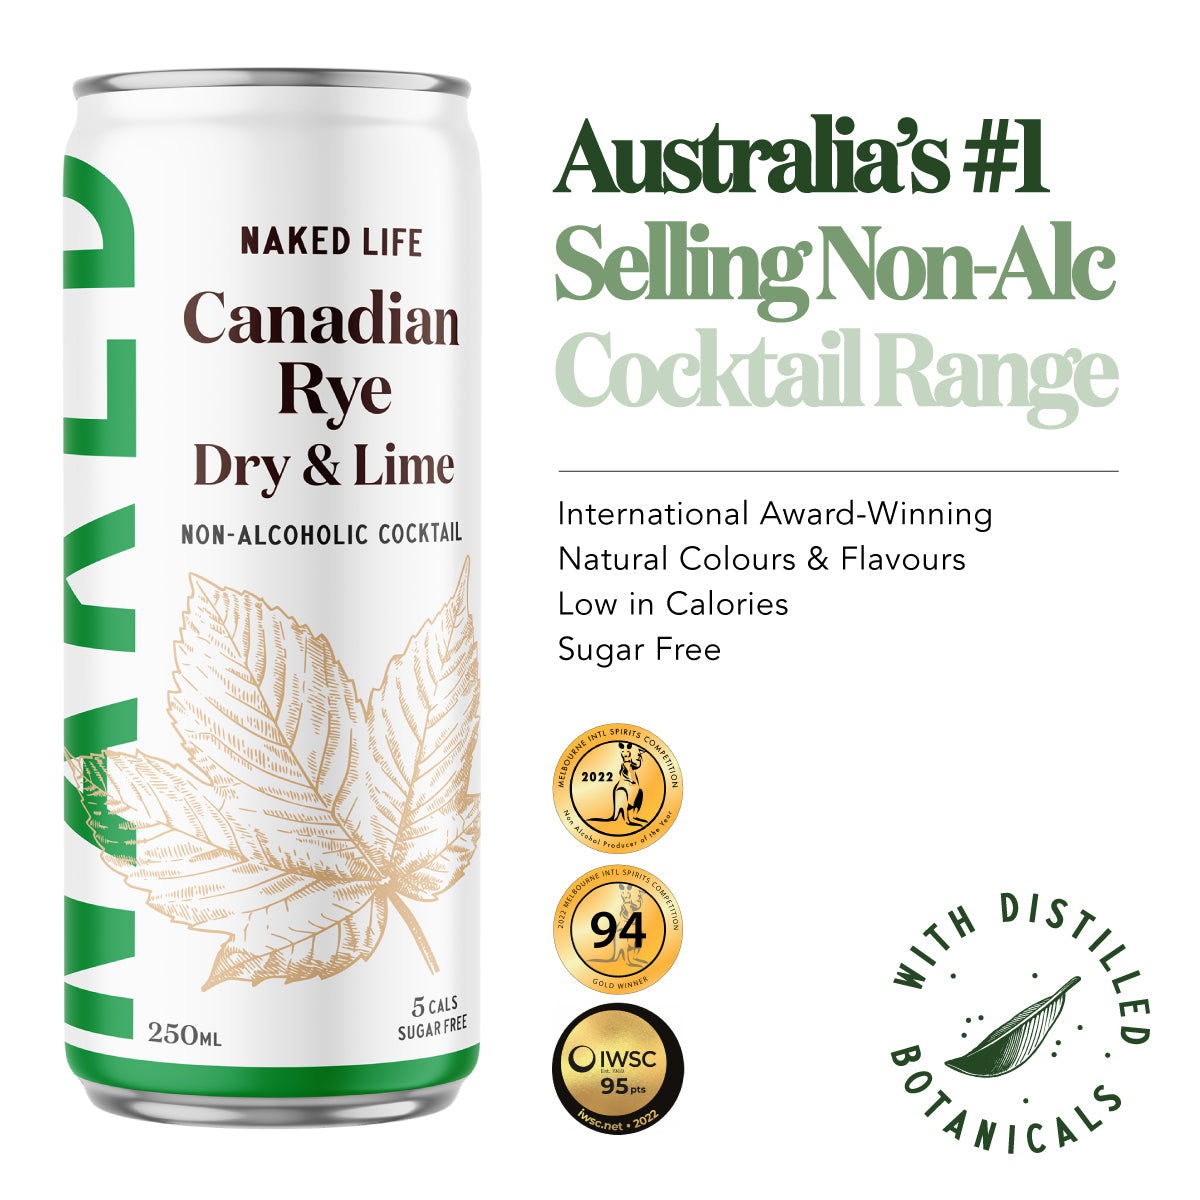 Naked Life Non-Alcoholic Cocktail Canadian Rye Spirit, Dry & Lime - 6 x 4 x 250ml Cans